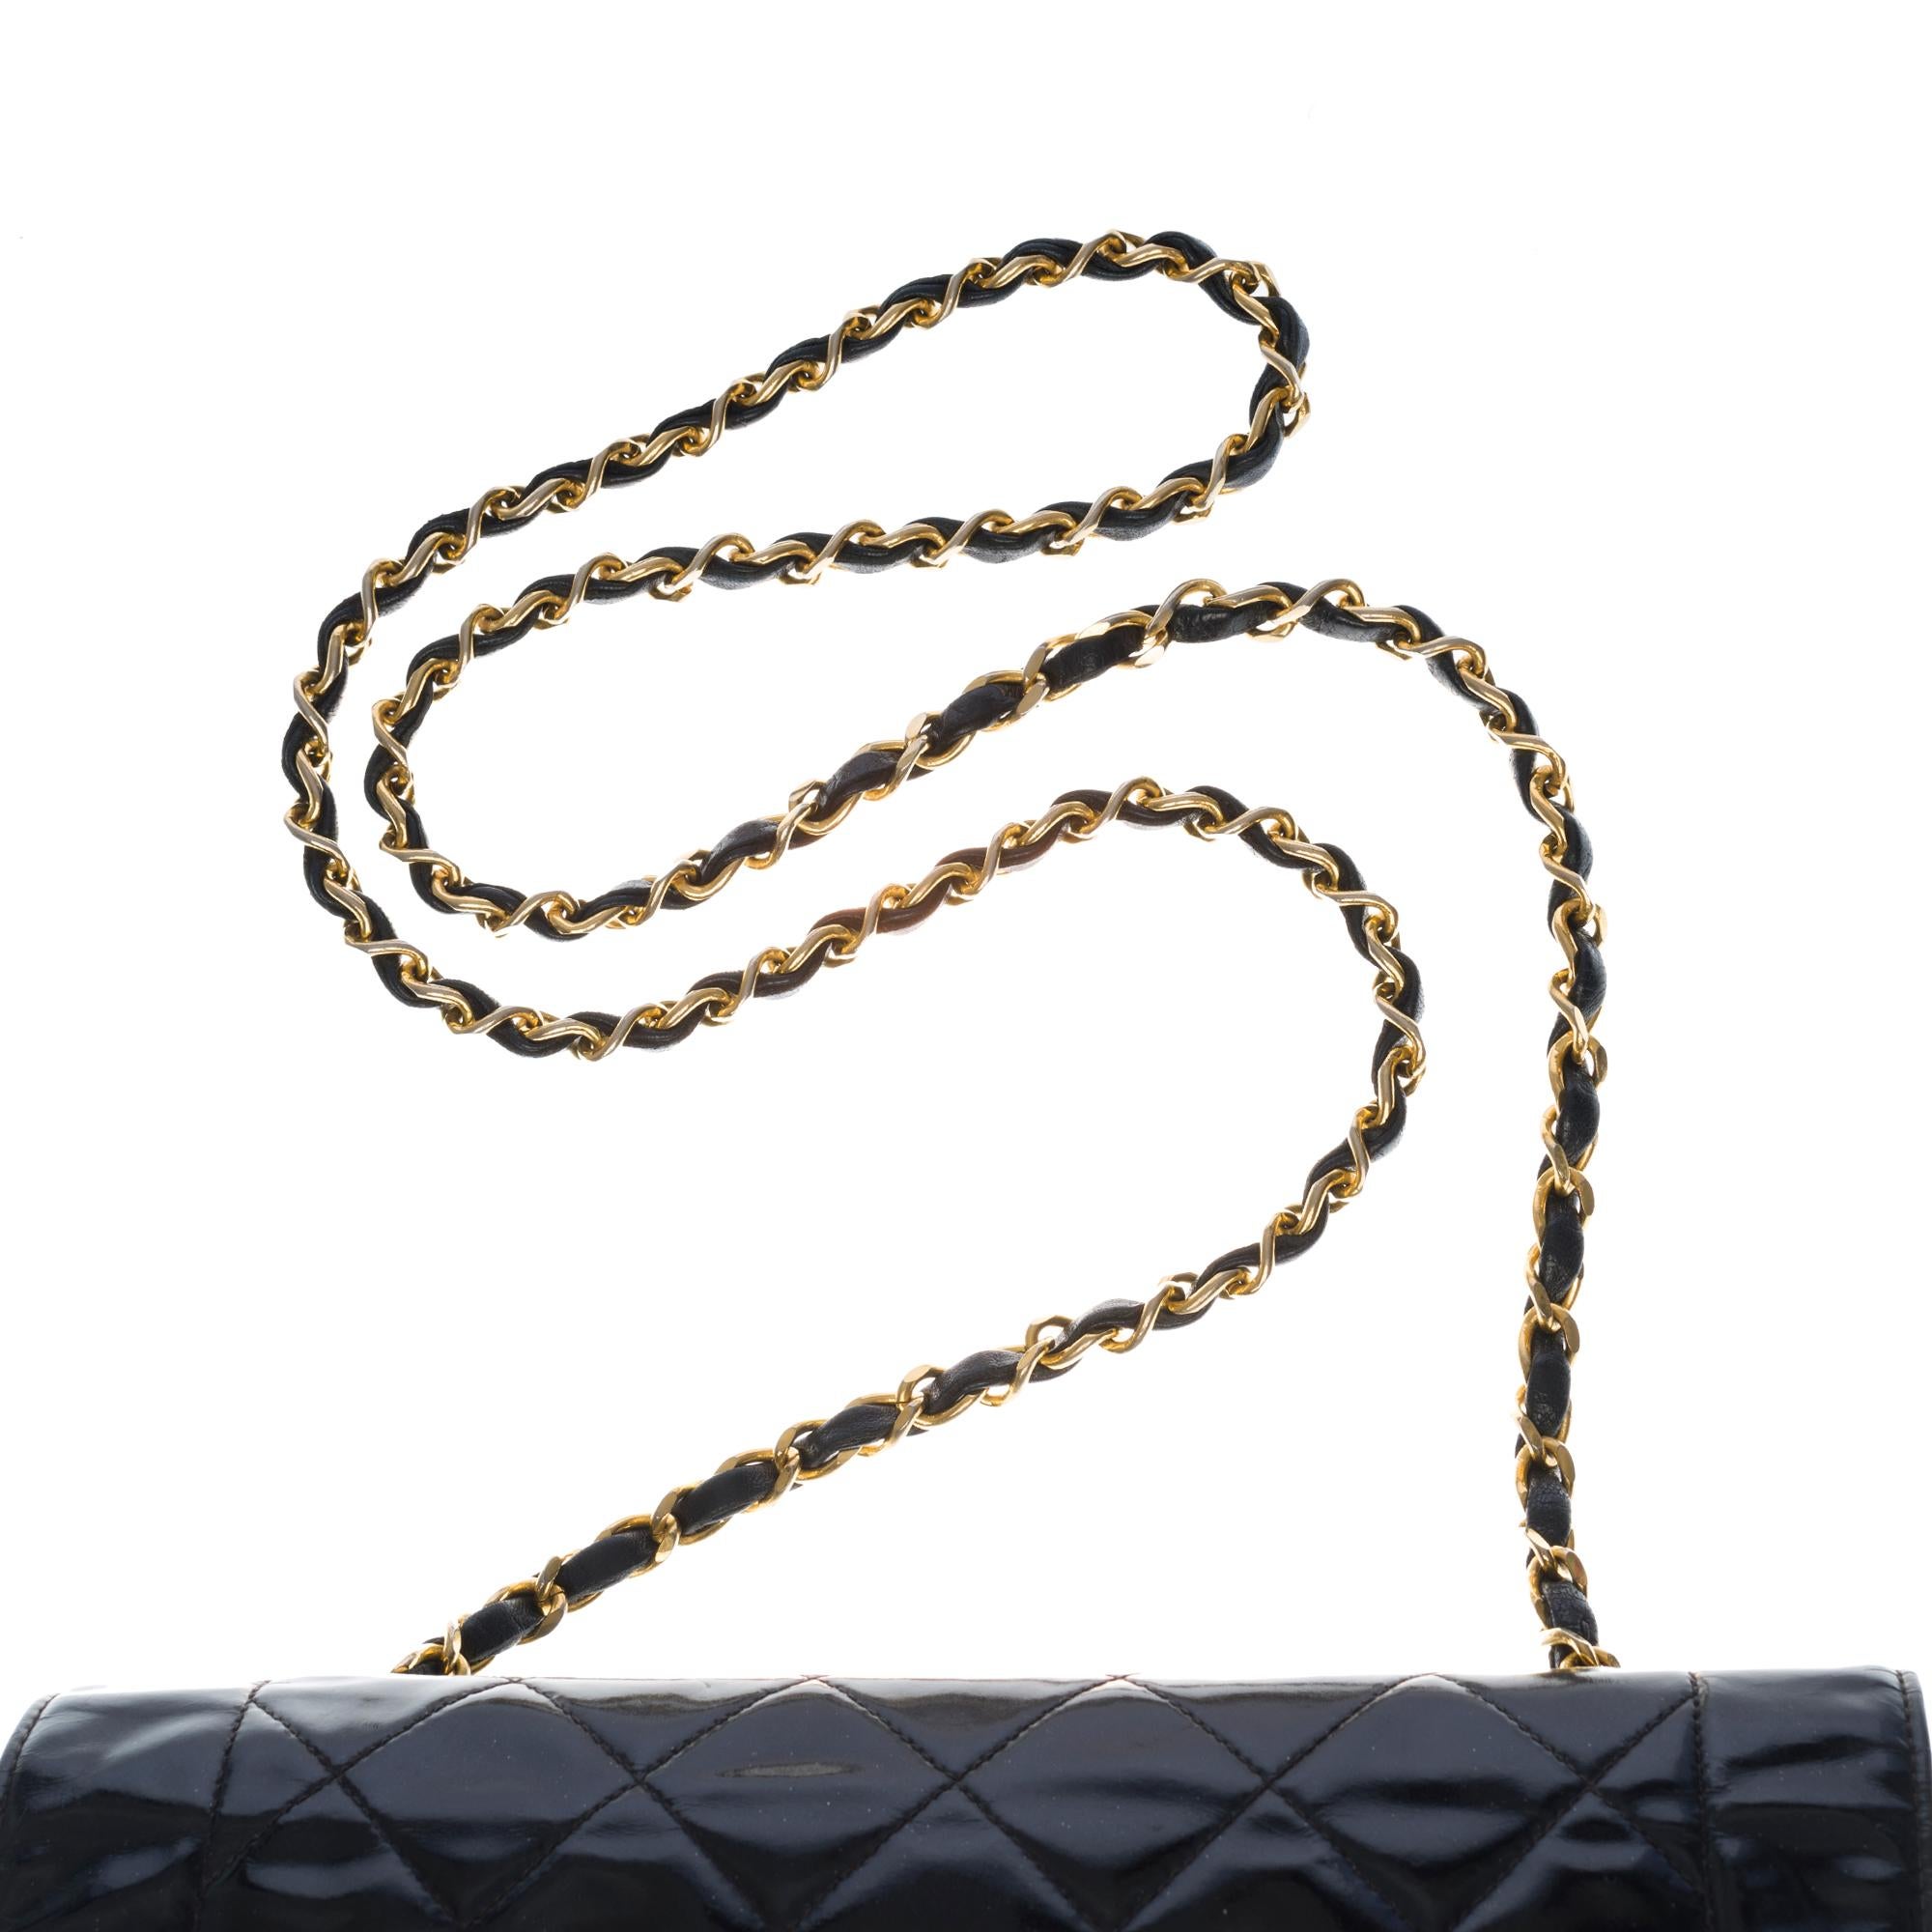 Stunning Chanel Diana Shoulder bag in black quilted patent leather and GHW 4